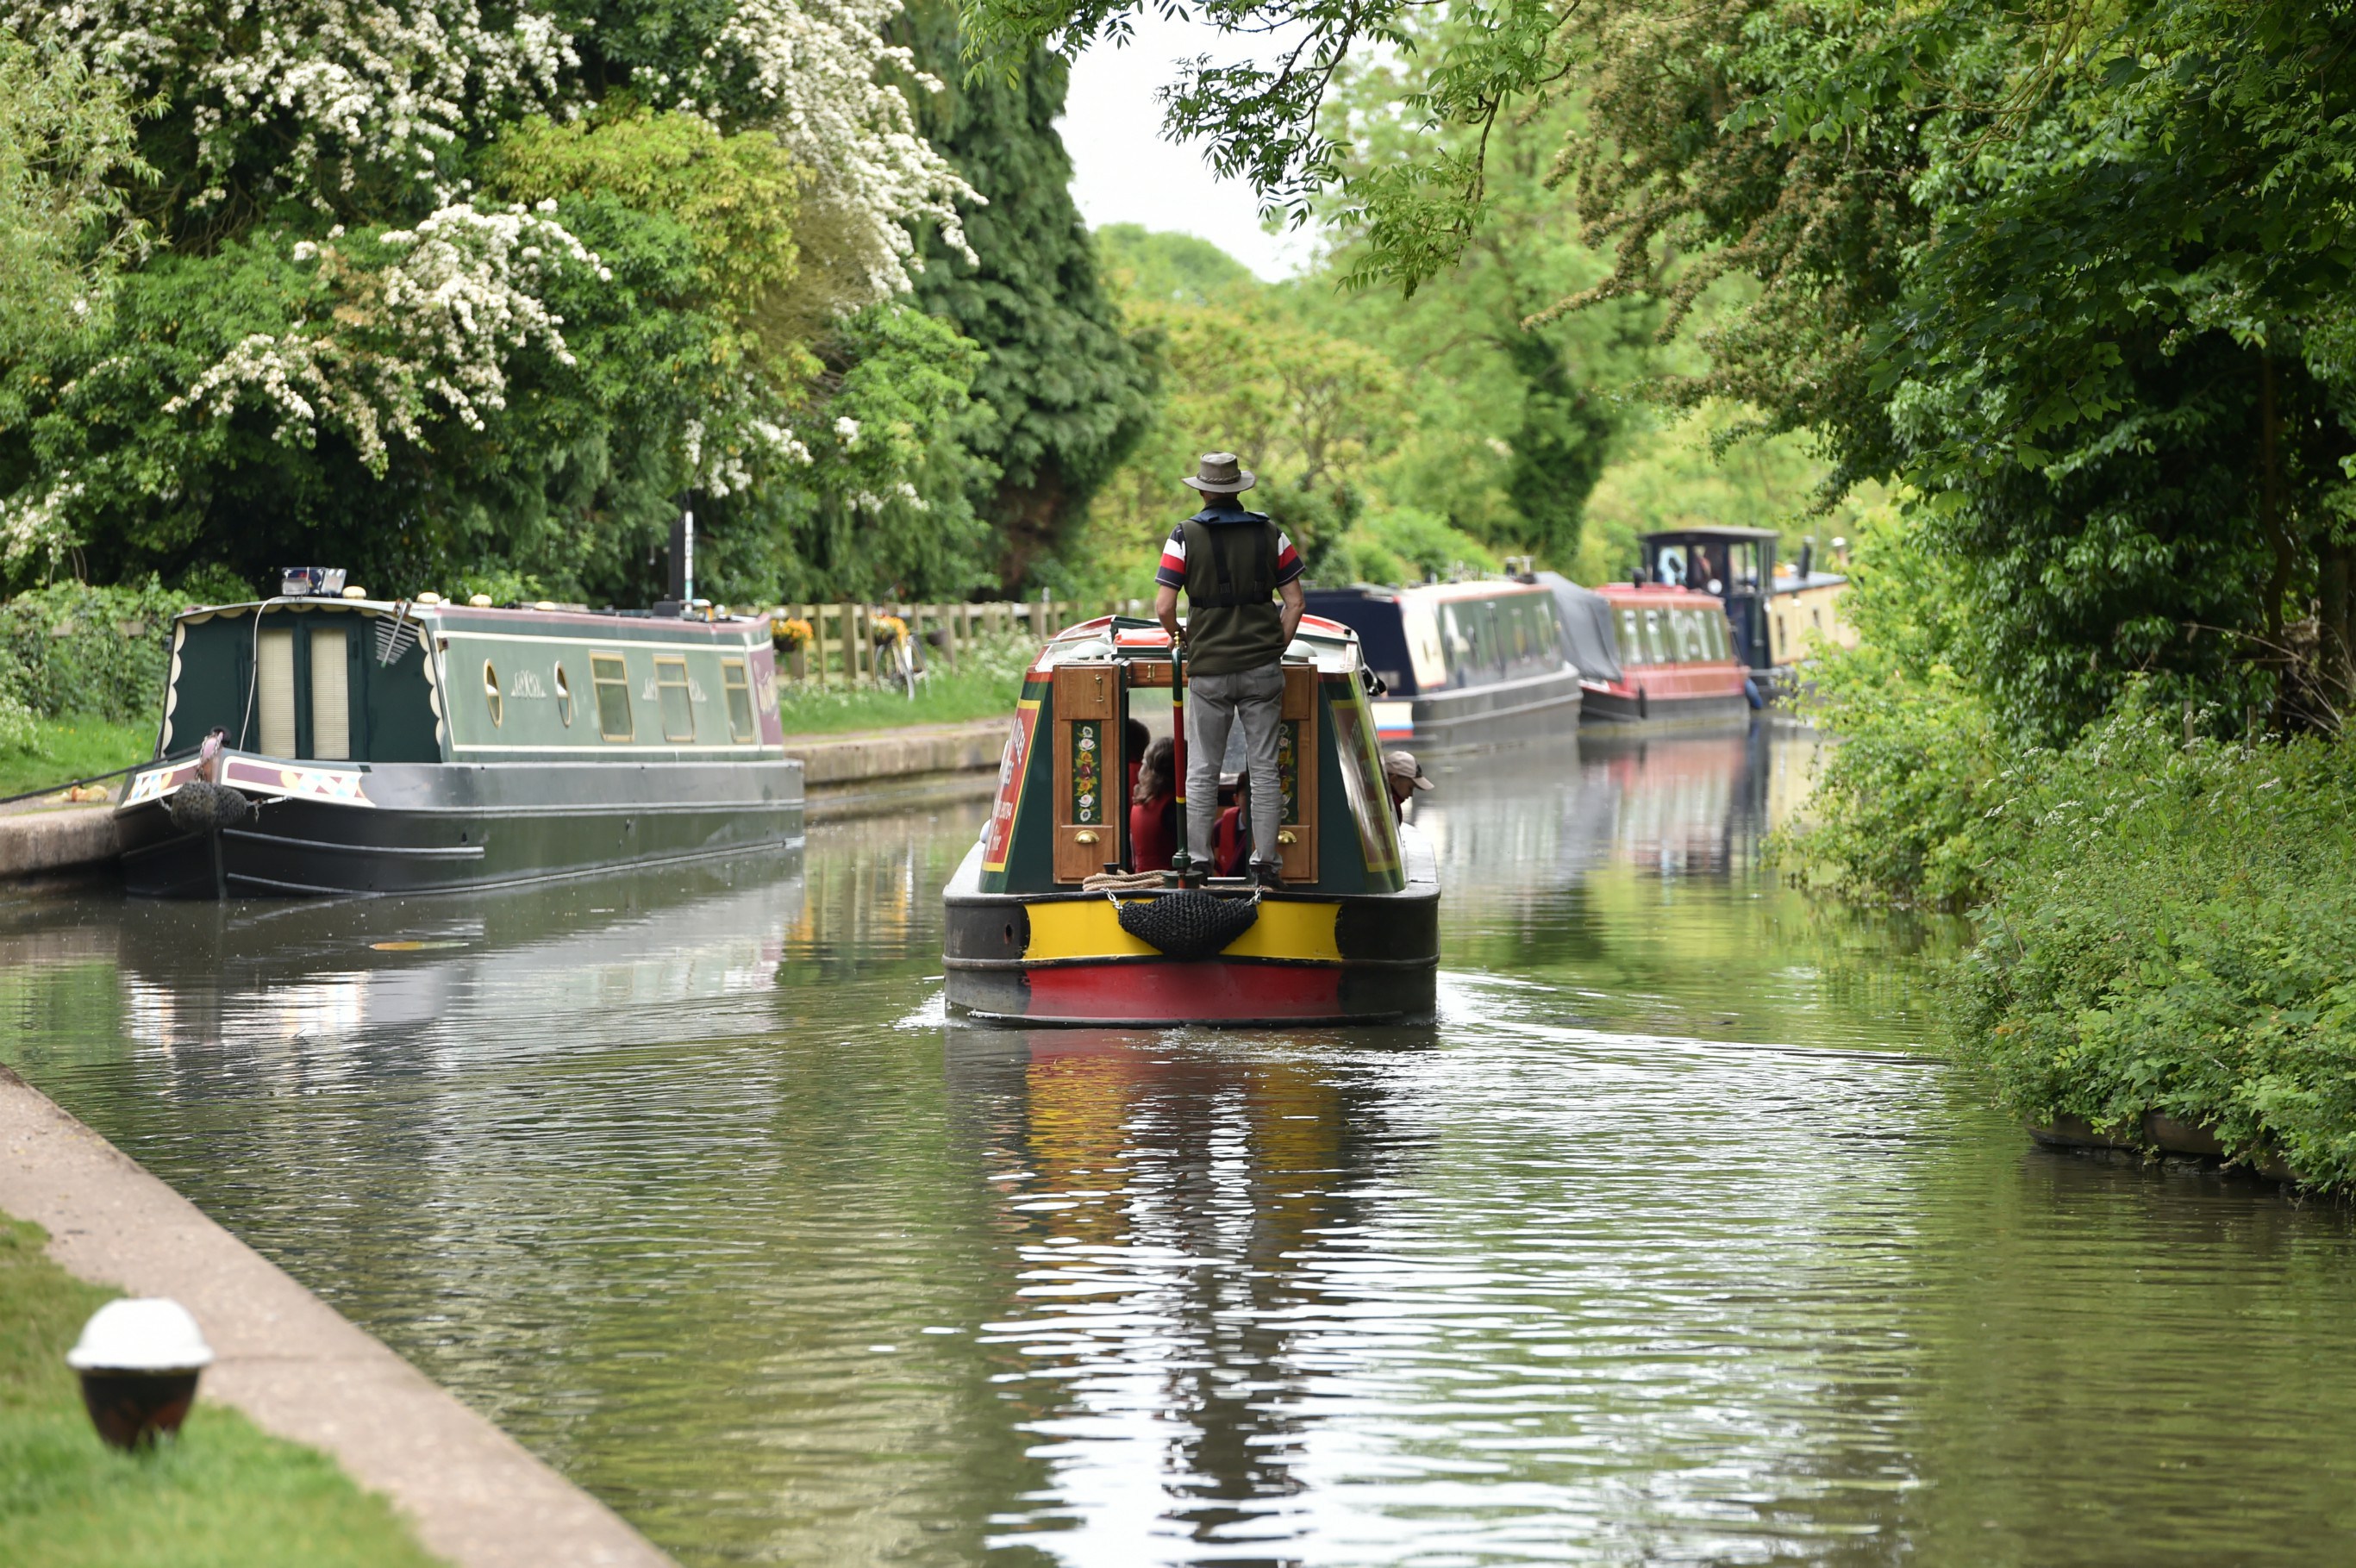 Drifters boating holidays – Boating Holidays on the UK Canals and Rivers